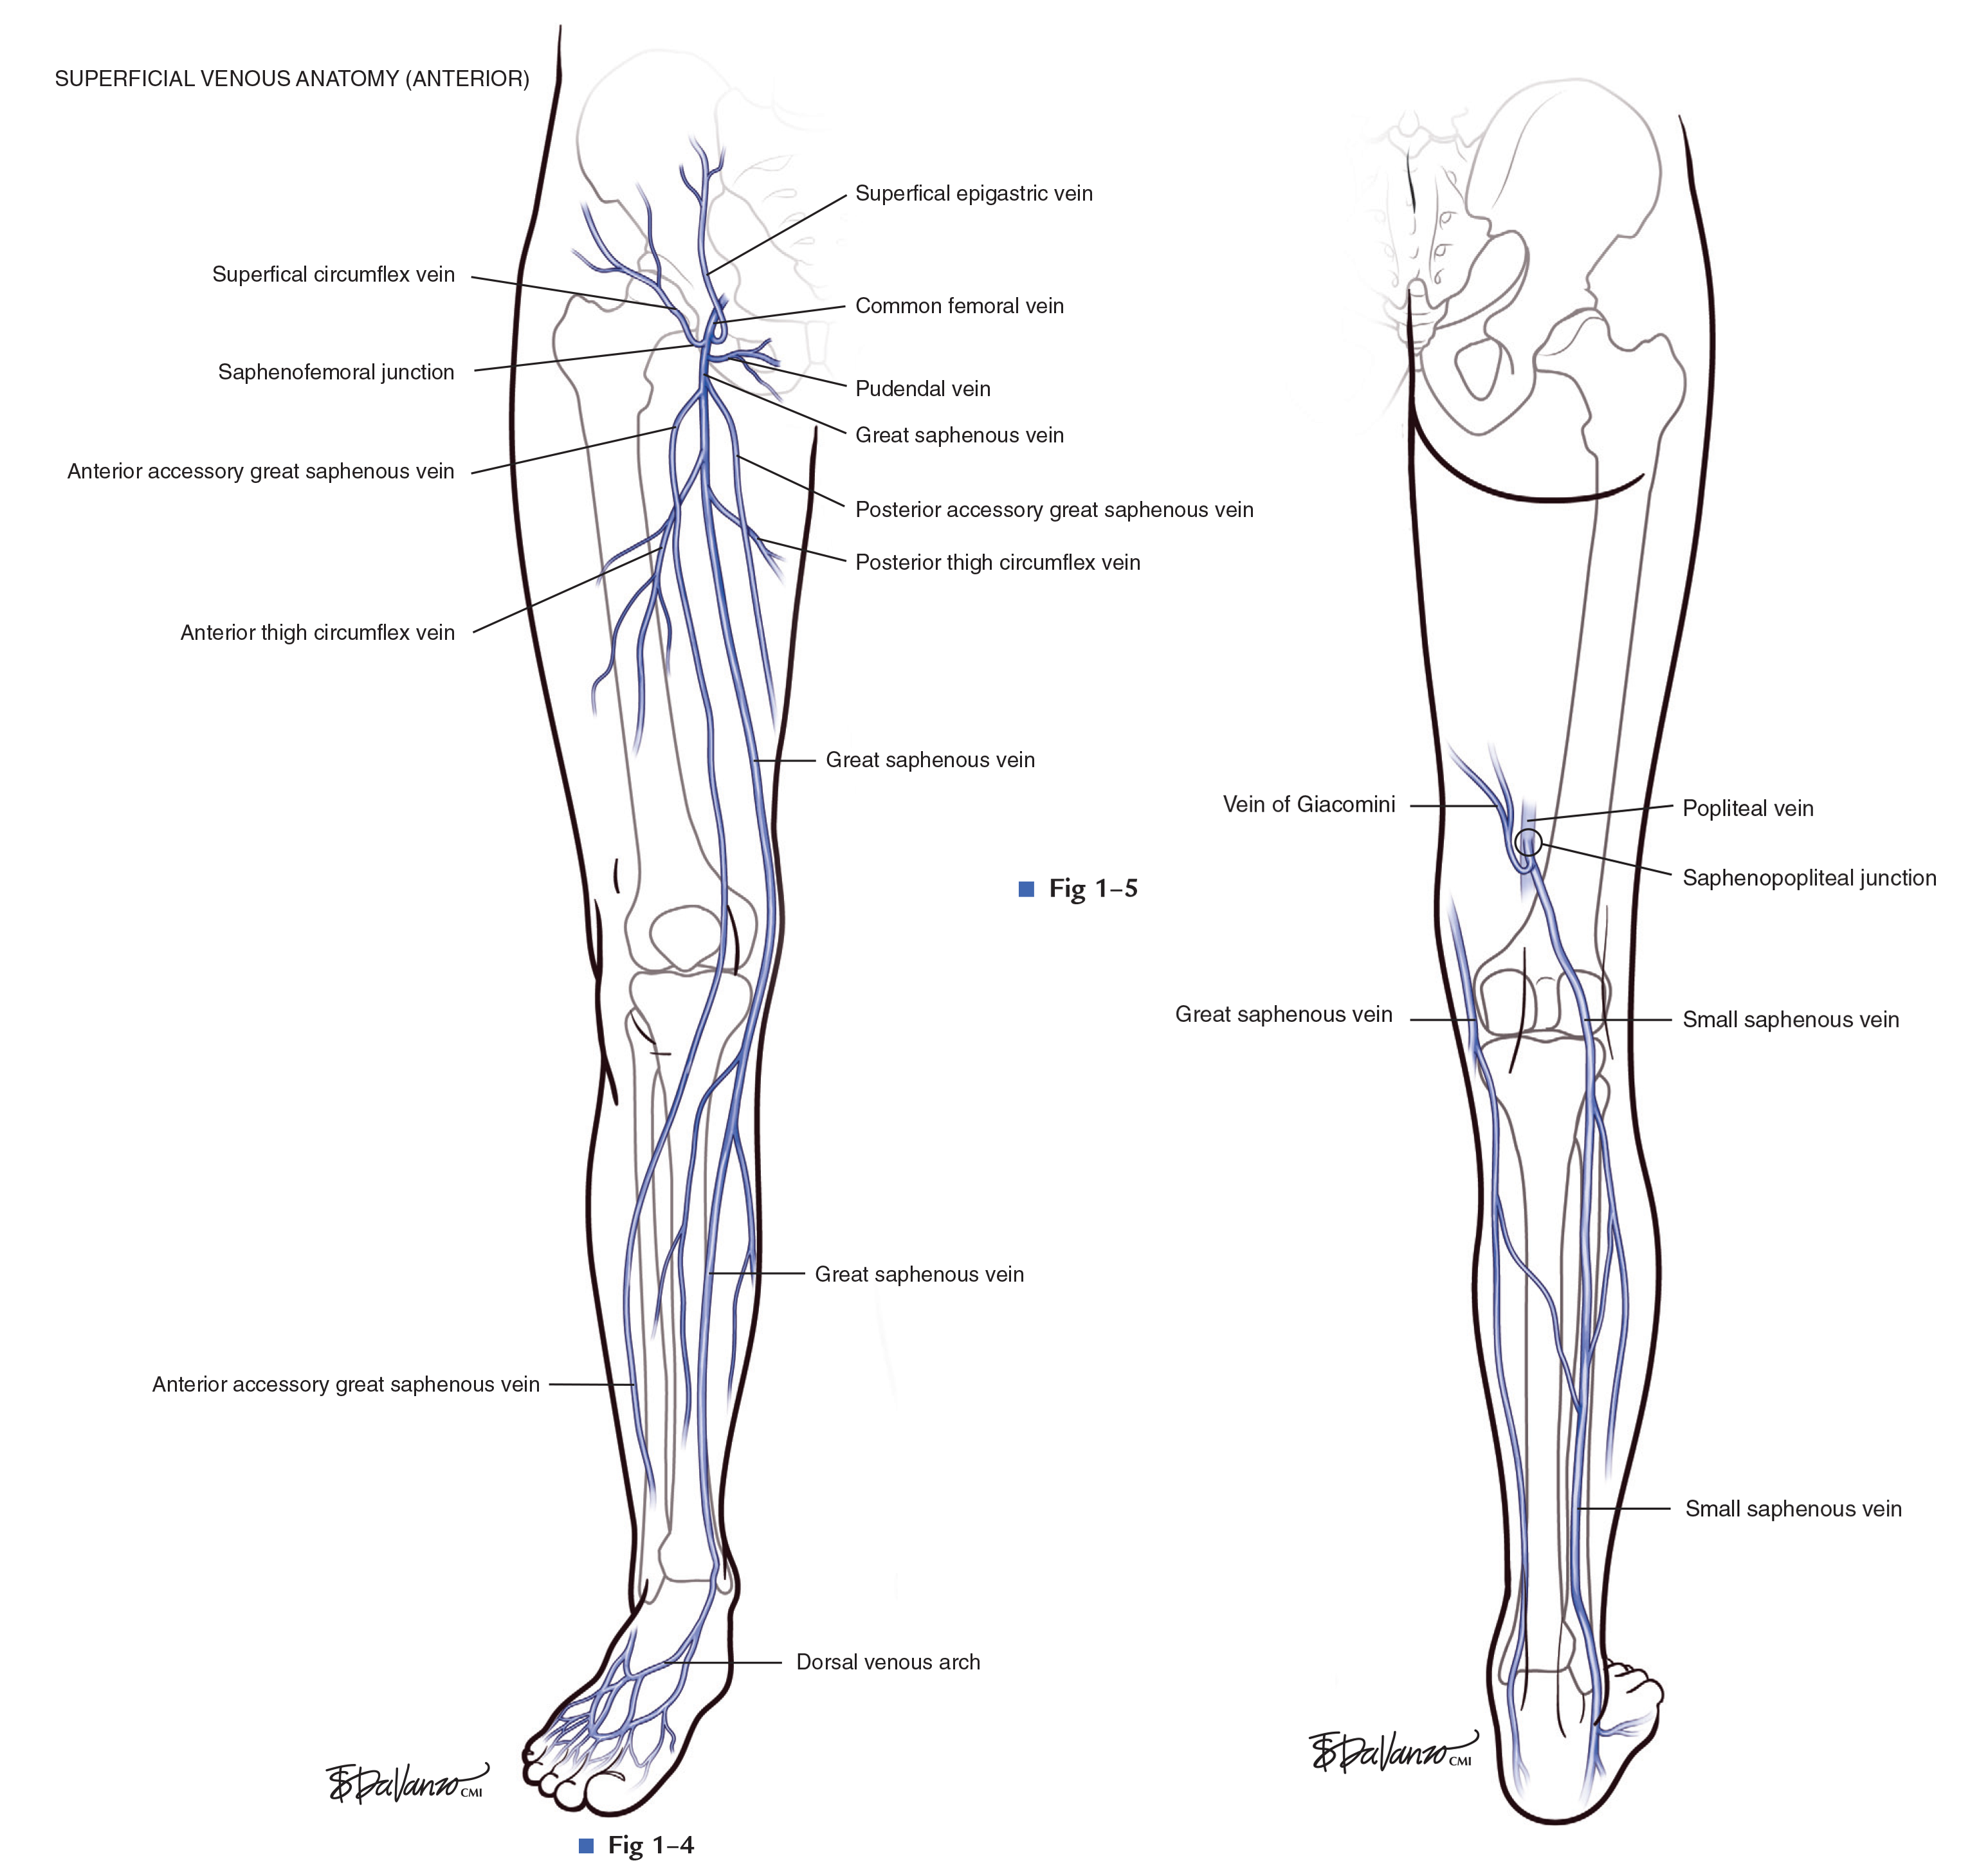 Lower Extremity Venous Anatomy (Atlas of Endovascular Venous Surgery)